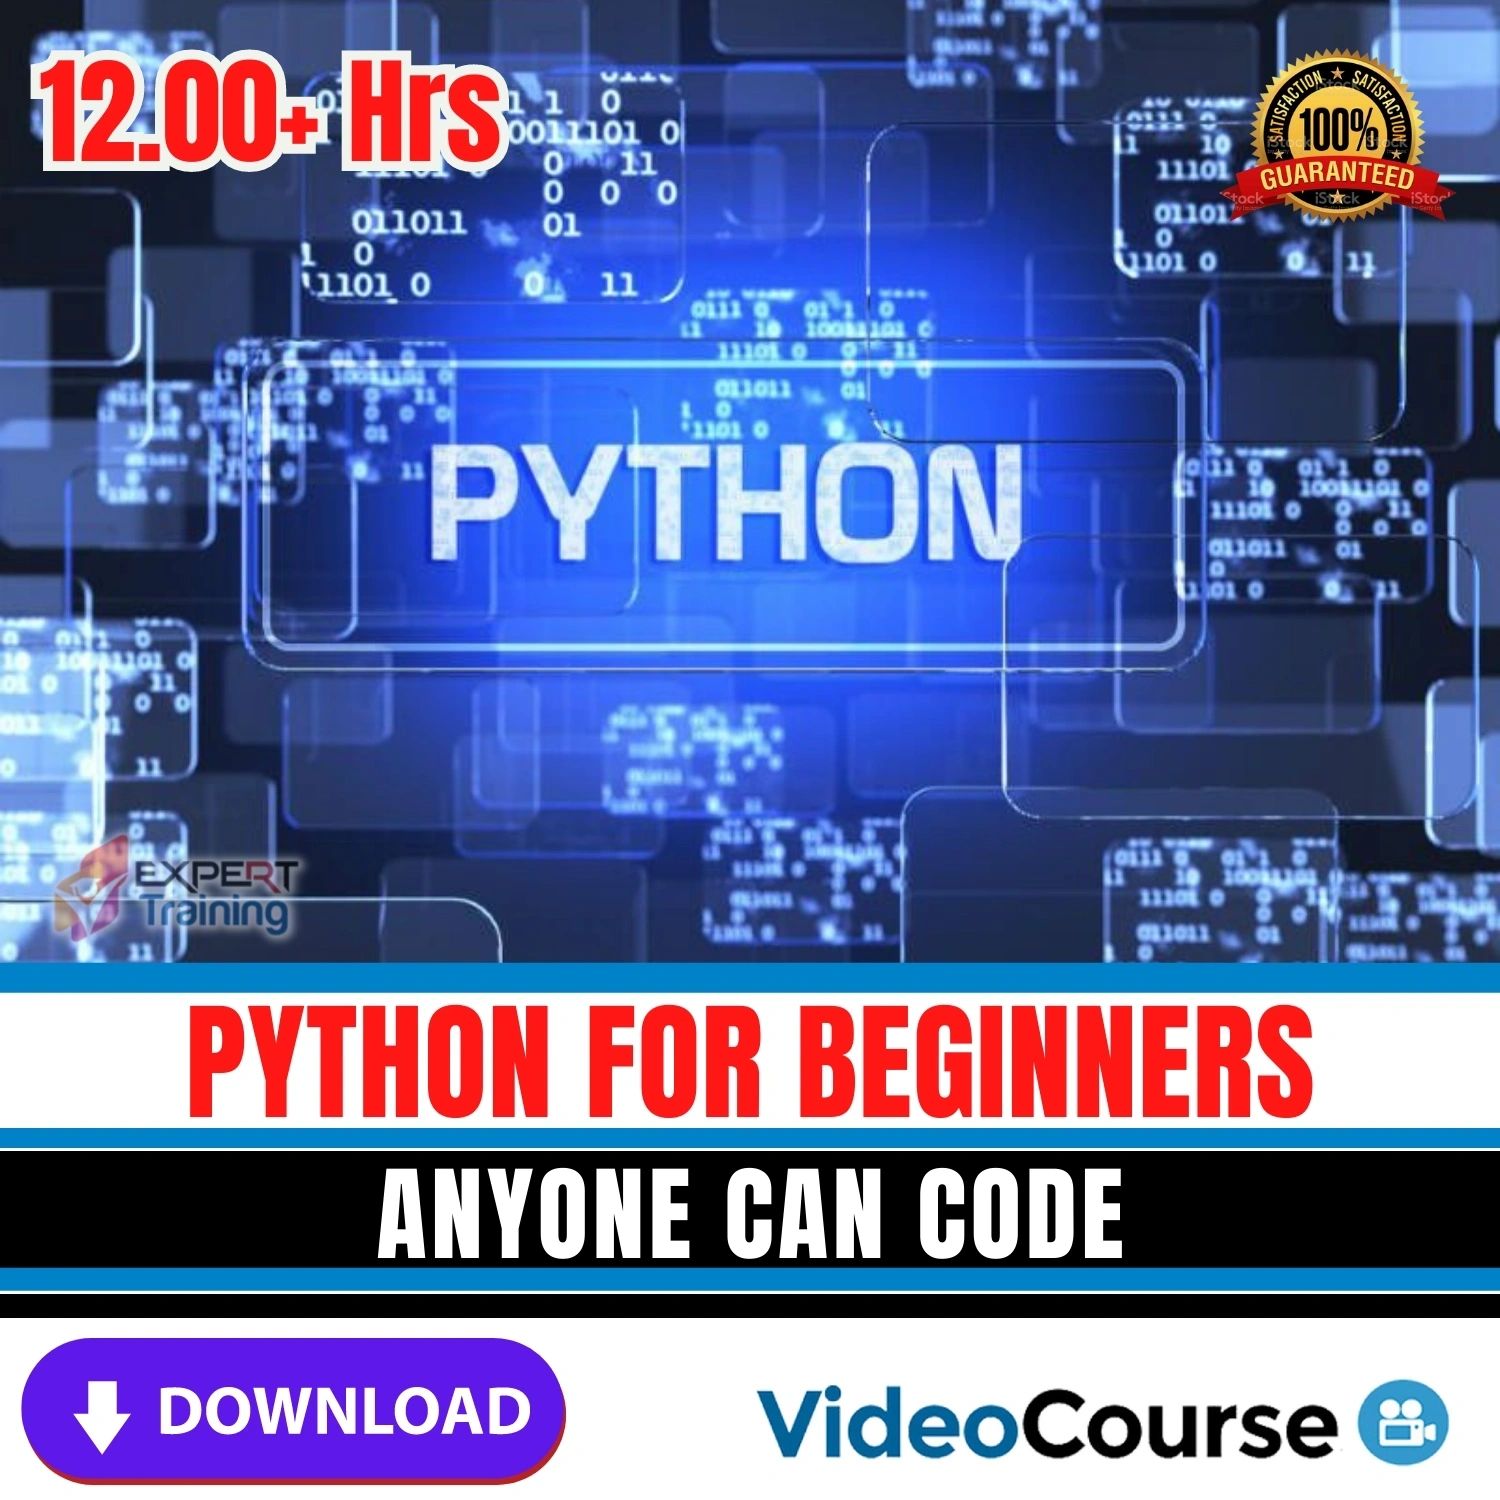 Python for Beginners Anyone Can Code